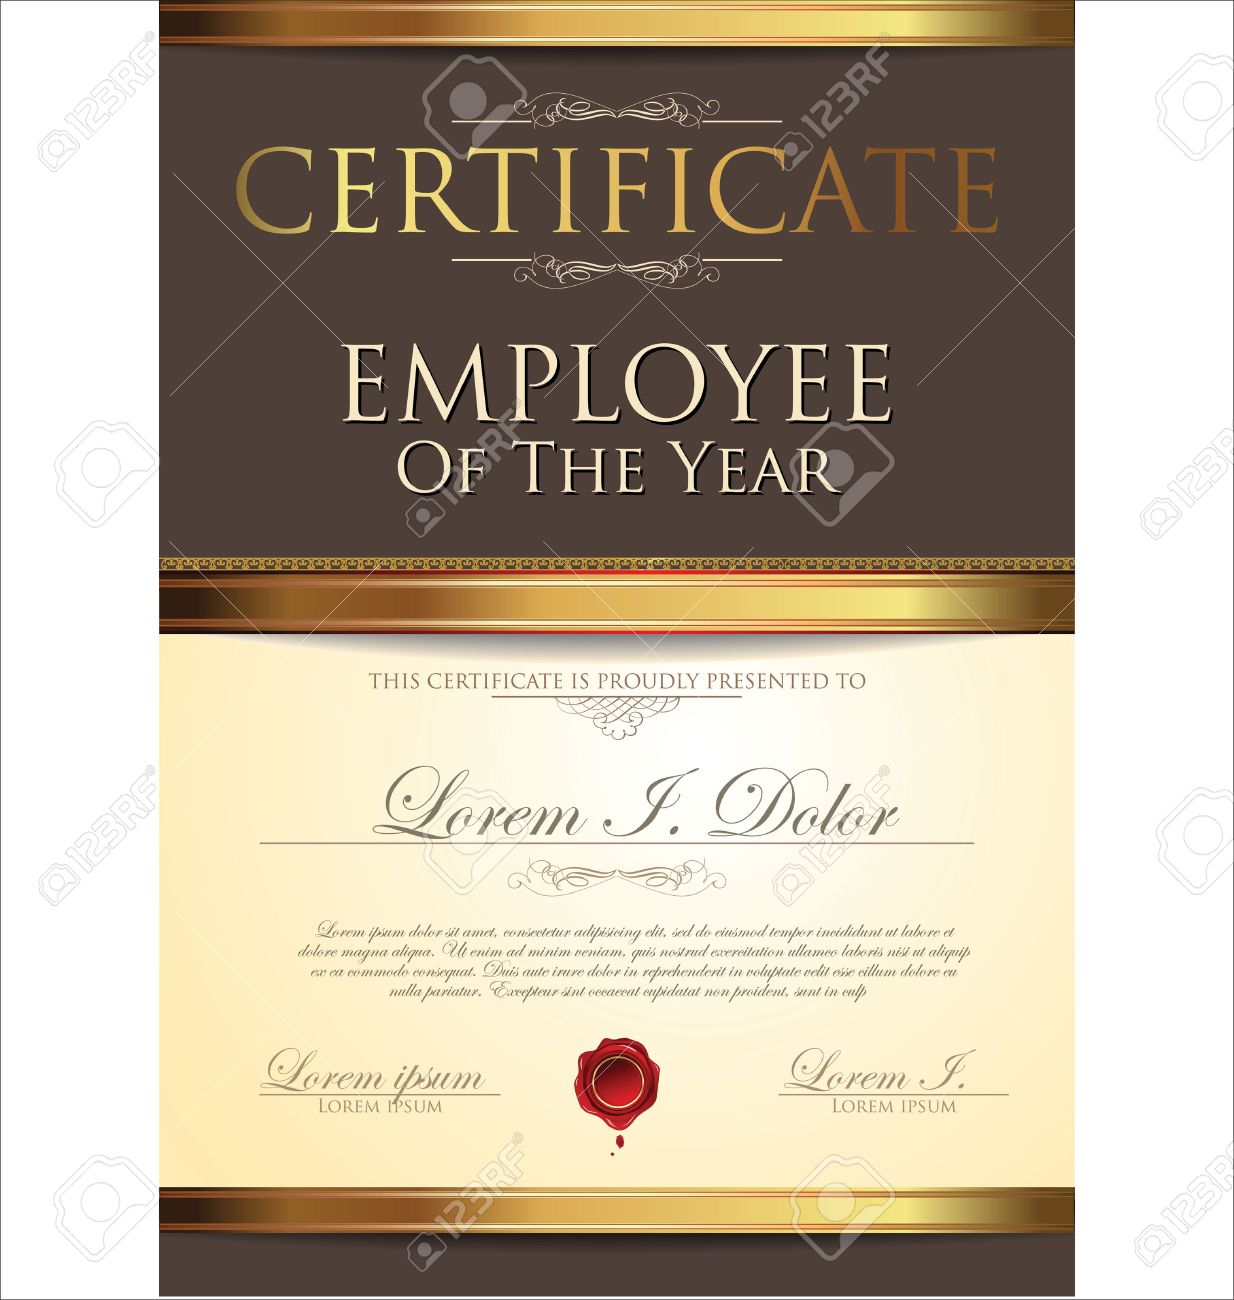 Certificate Template, Employee Of The Year Royalty Free SVG  Inside Employee Of The Year Certificate Template Free